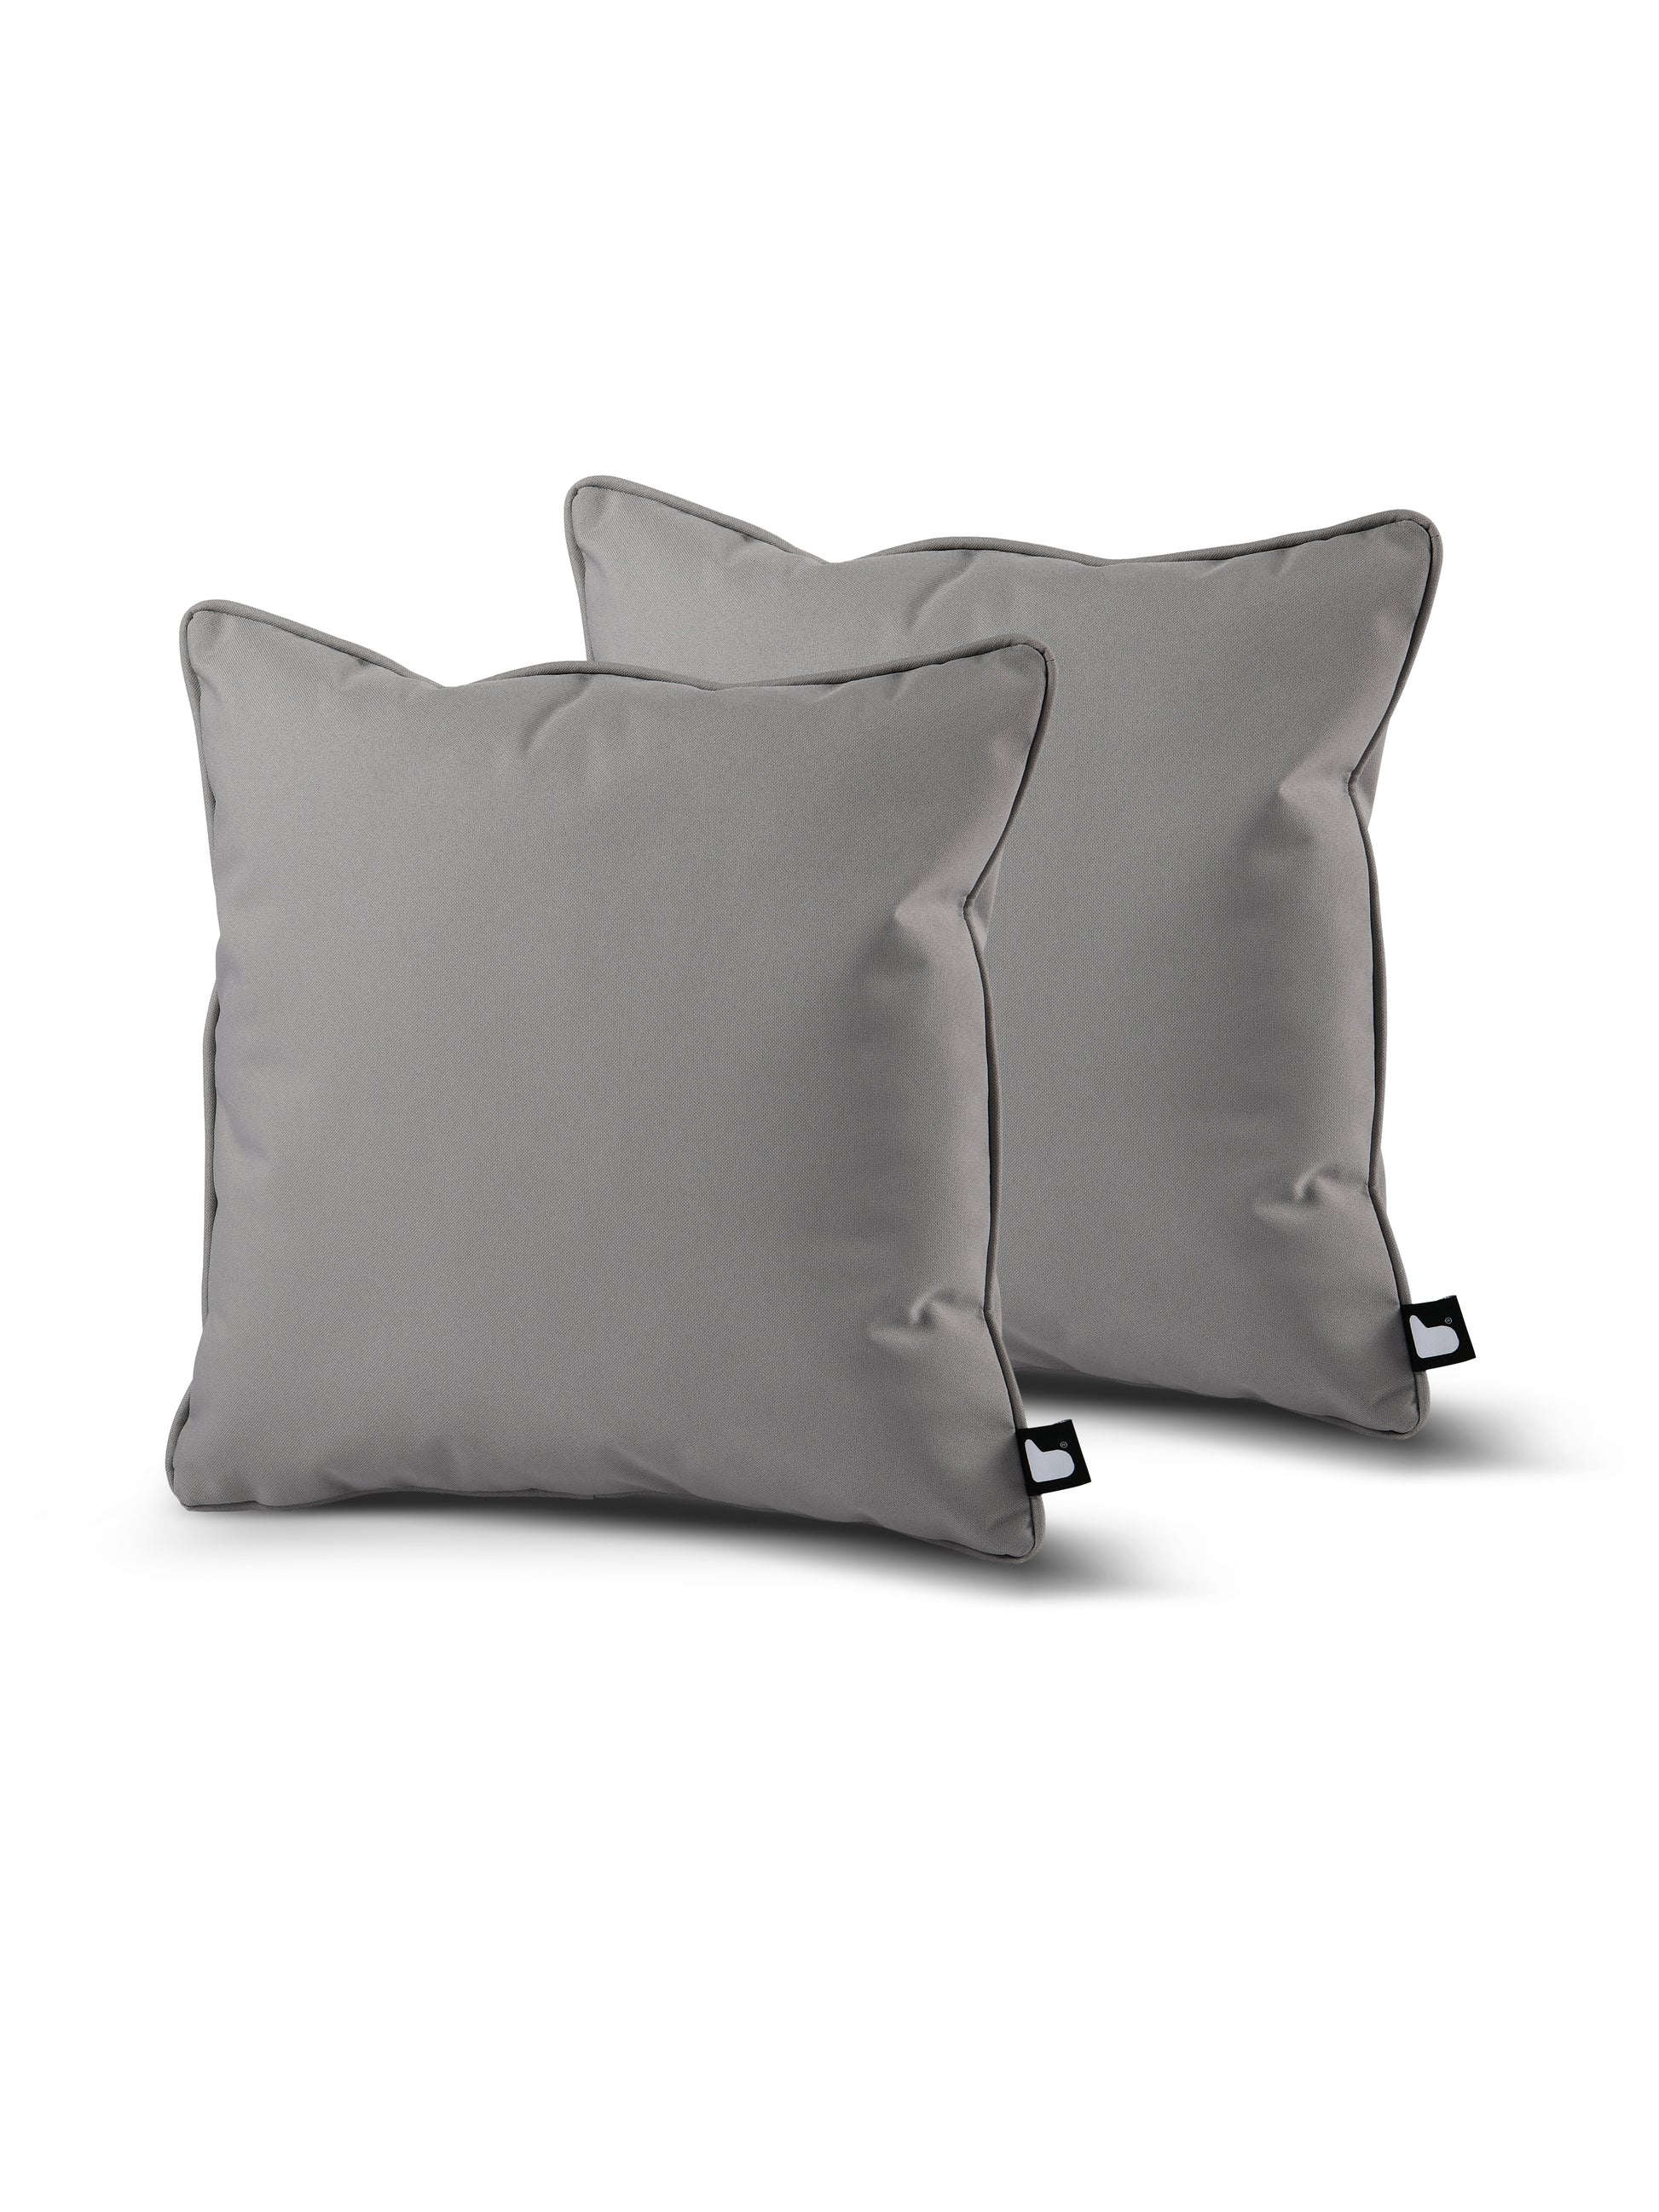 Two gray throw pillows with smooth, breathable polyester fabric are shown against a white background. Each pillow has a black tag on one edge. The **B Cushion Twin Pack Brights Collection** from **Brisks** is stacked with one slightly in front of the other, both upright.